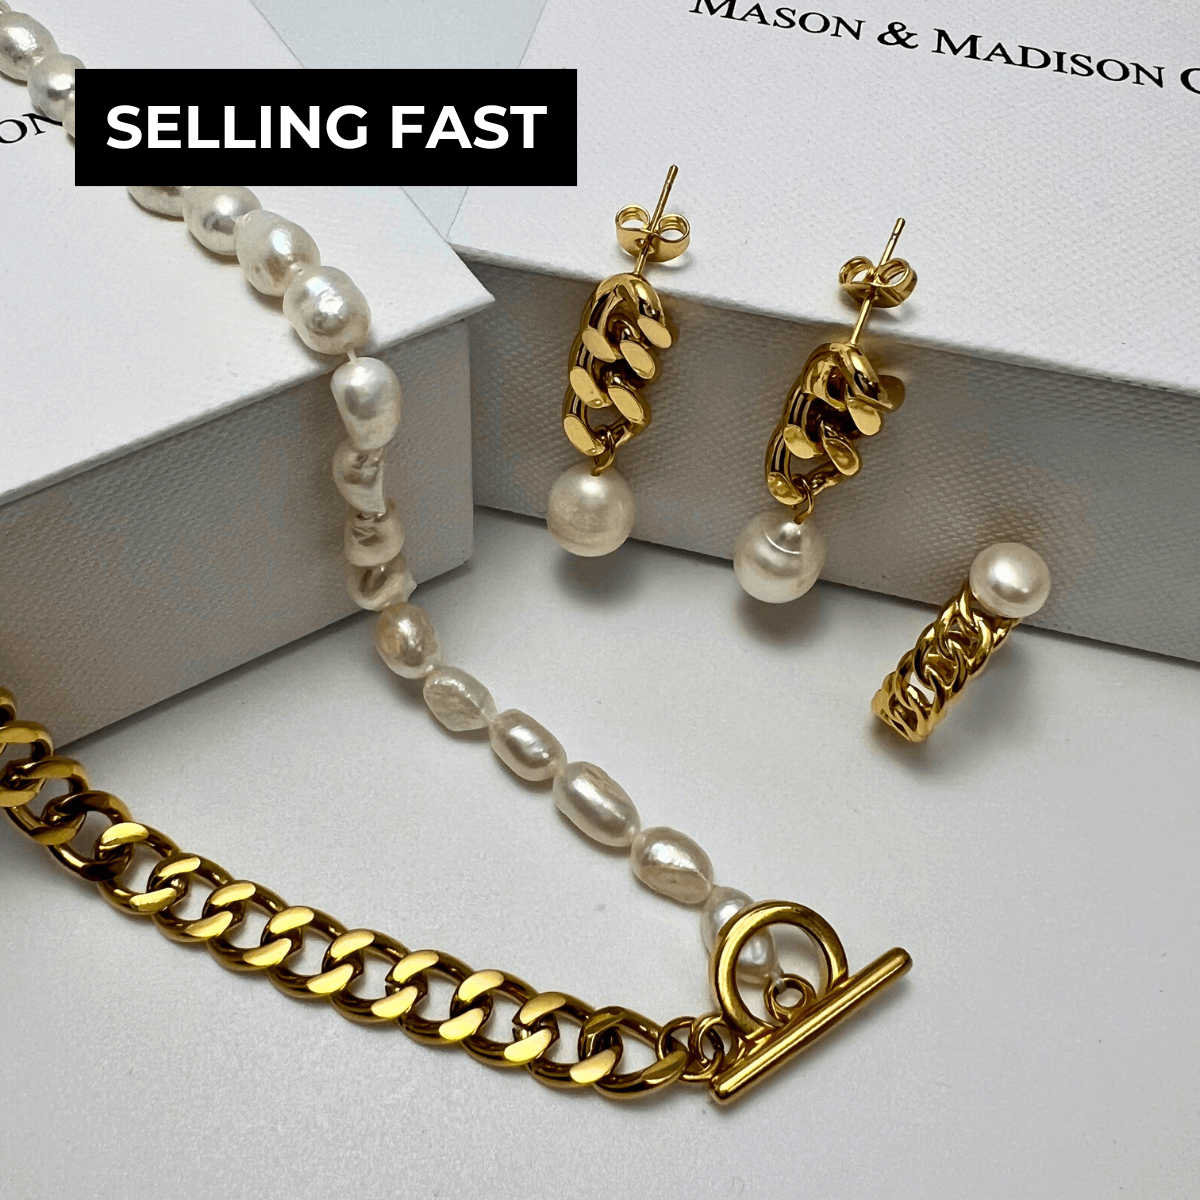 1# BEST Pearl Gold Chain Jewelry Bundle Set Gift for Women | #1 Best Most Top Trendy Trending Aesthetic Yellow Gold Pearl Chain Necklace, Earrings, Ring Jewelry Gift for Women, Mother, Wife, Ladies | Mason & Madison Co.